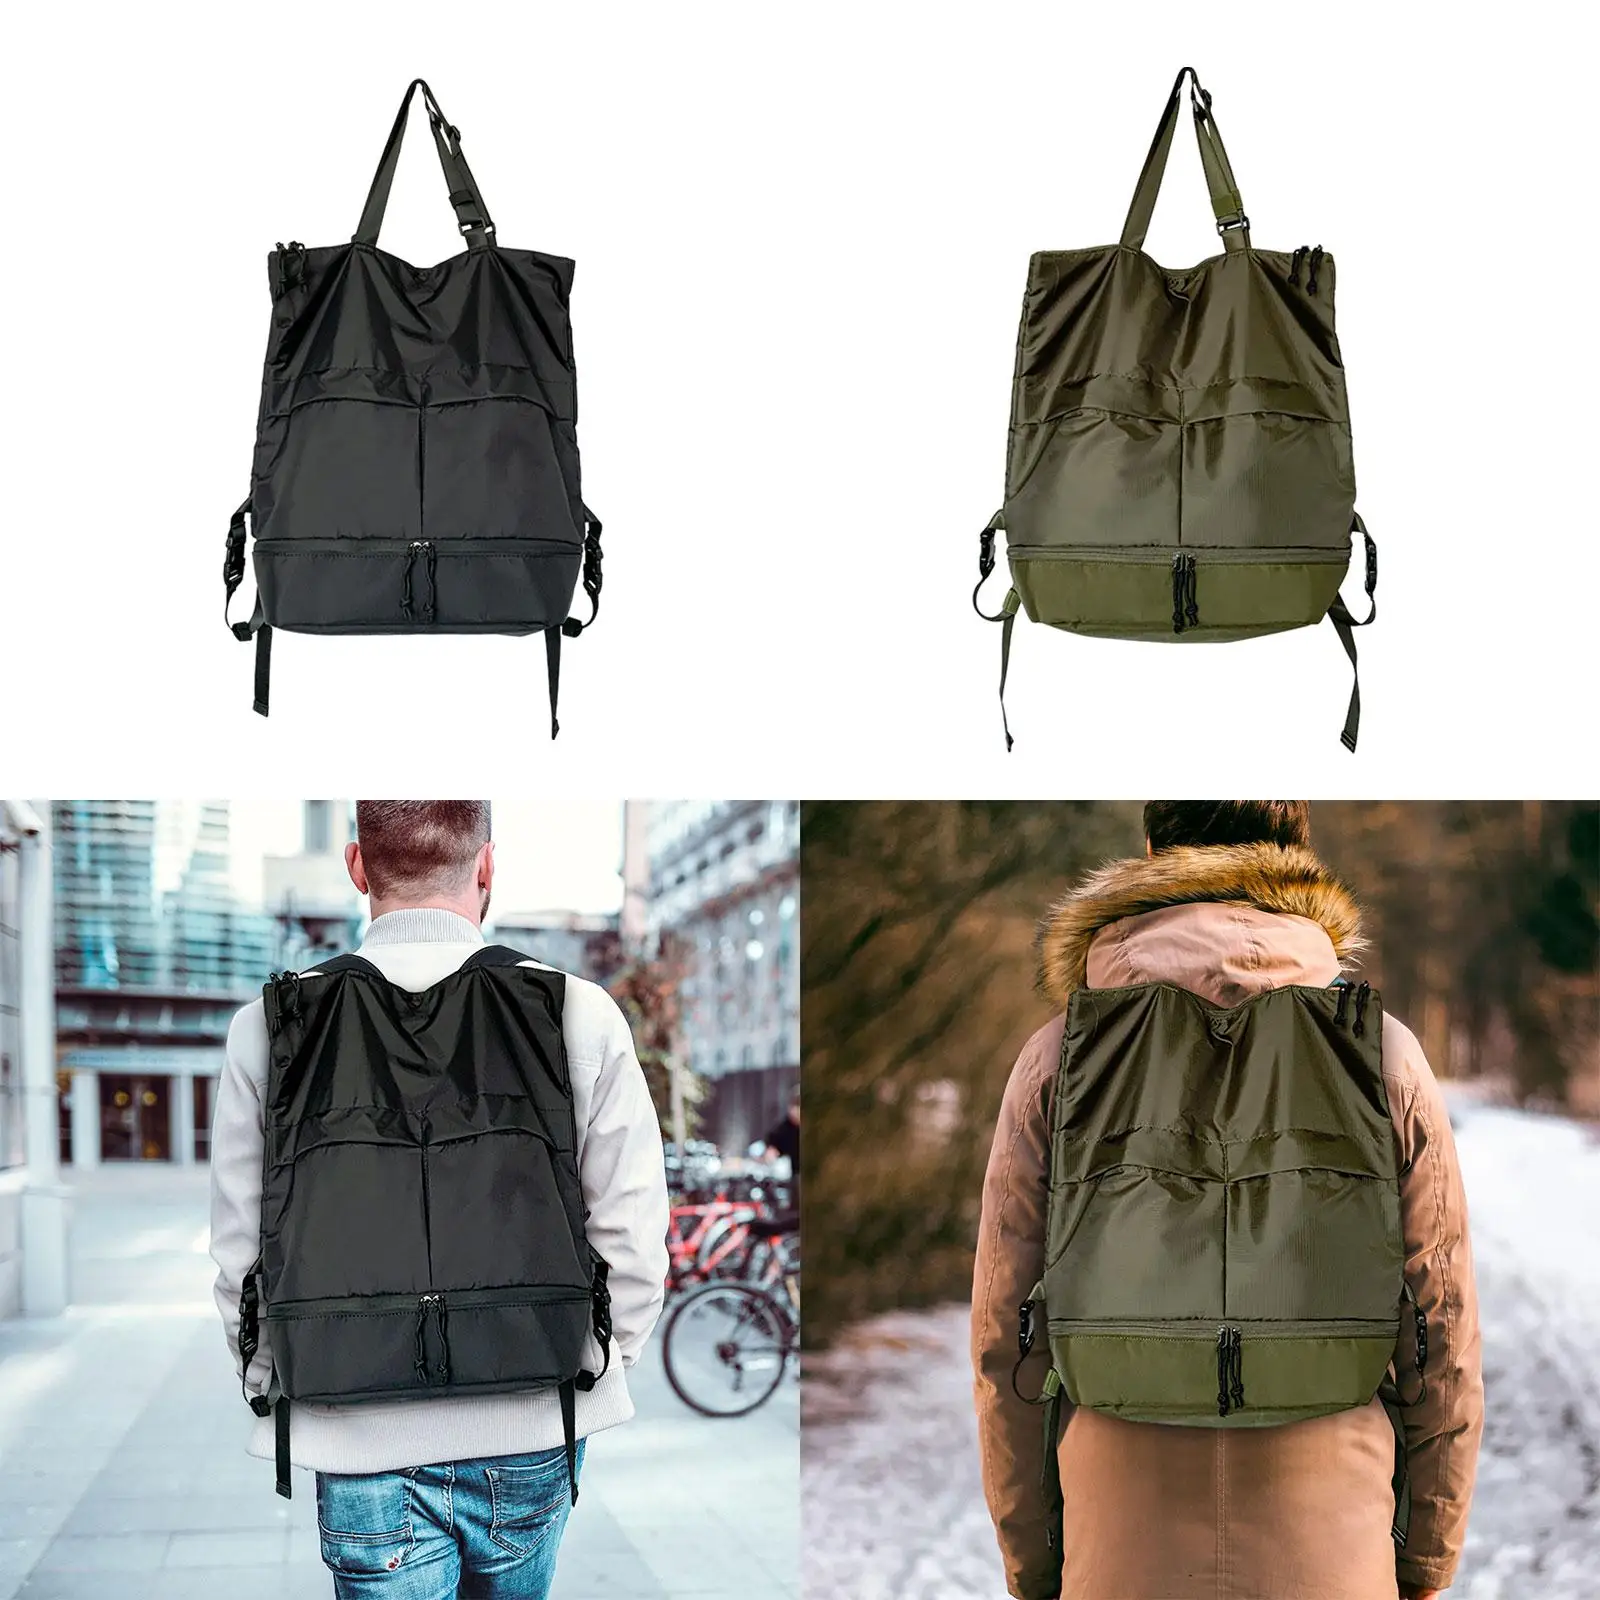 Fashion Backpack Portable with Adjustable Shoulder Straps Stylish Daypack for Hiking Party Climbing Indoor Outdoor Backpacking